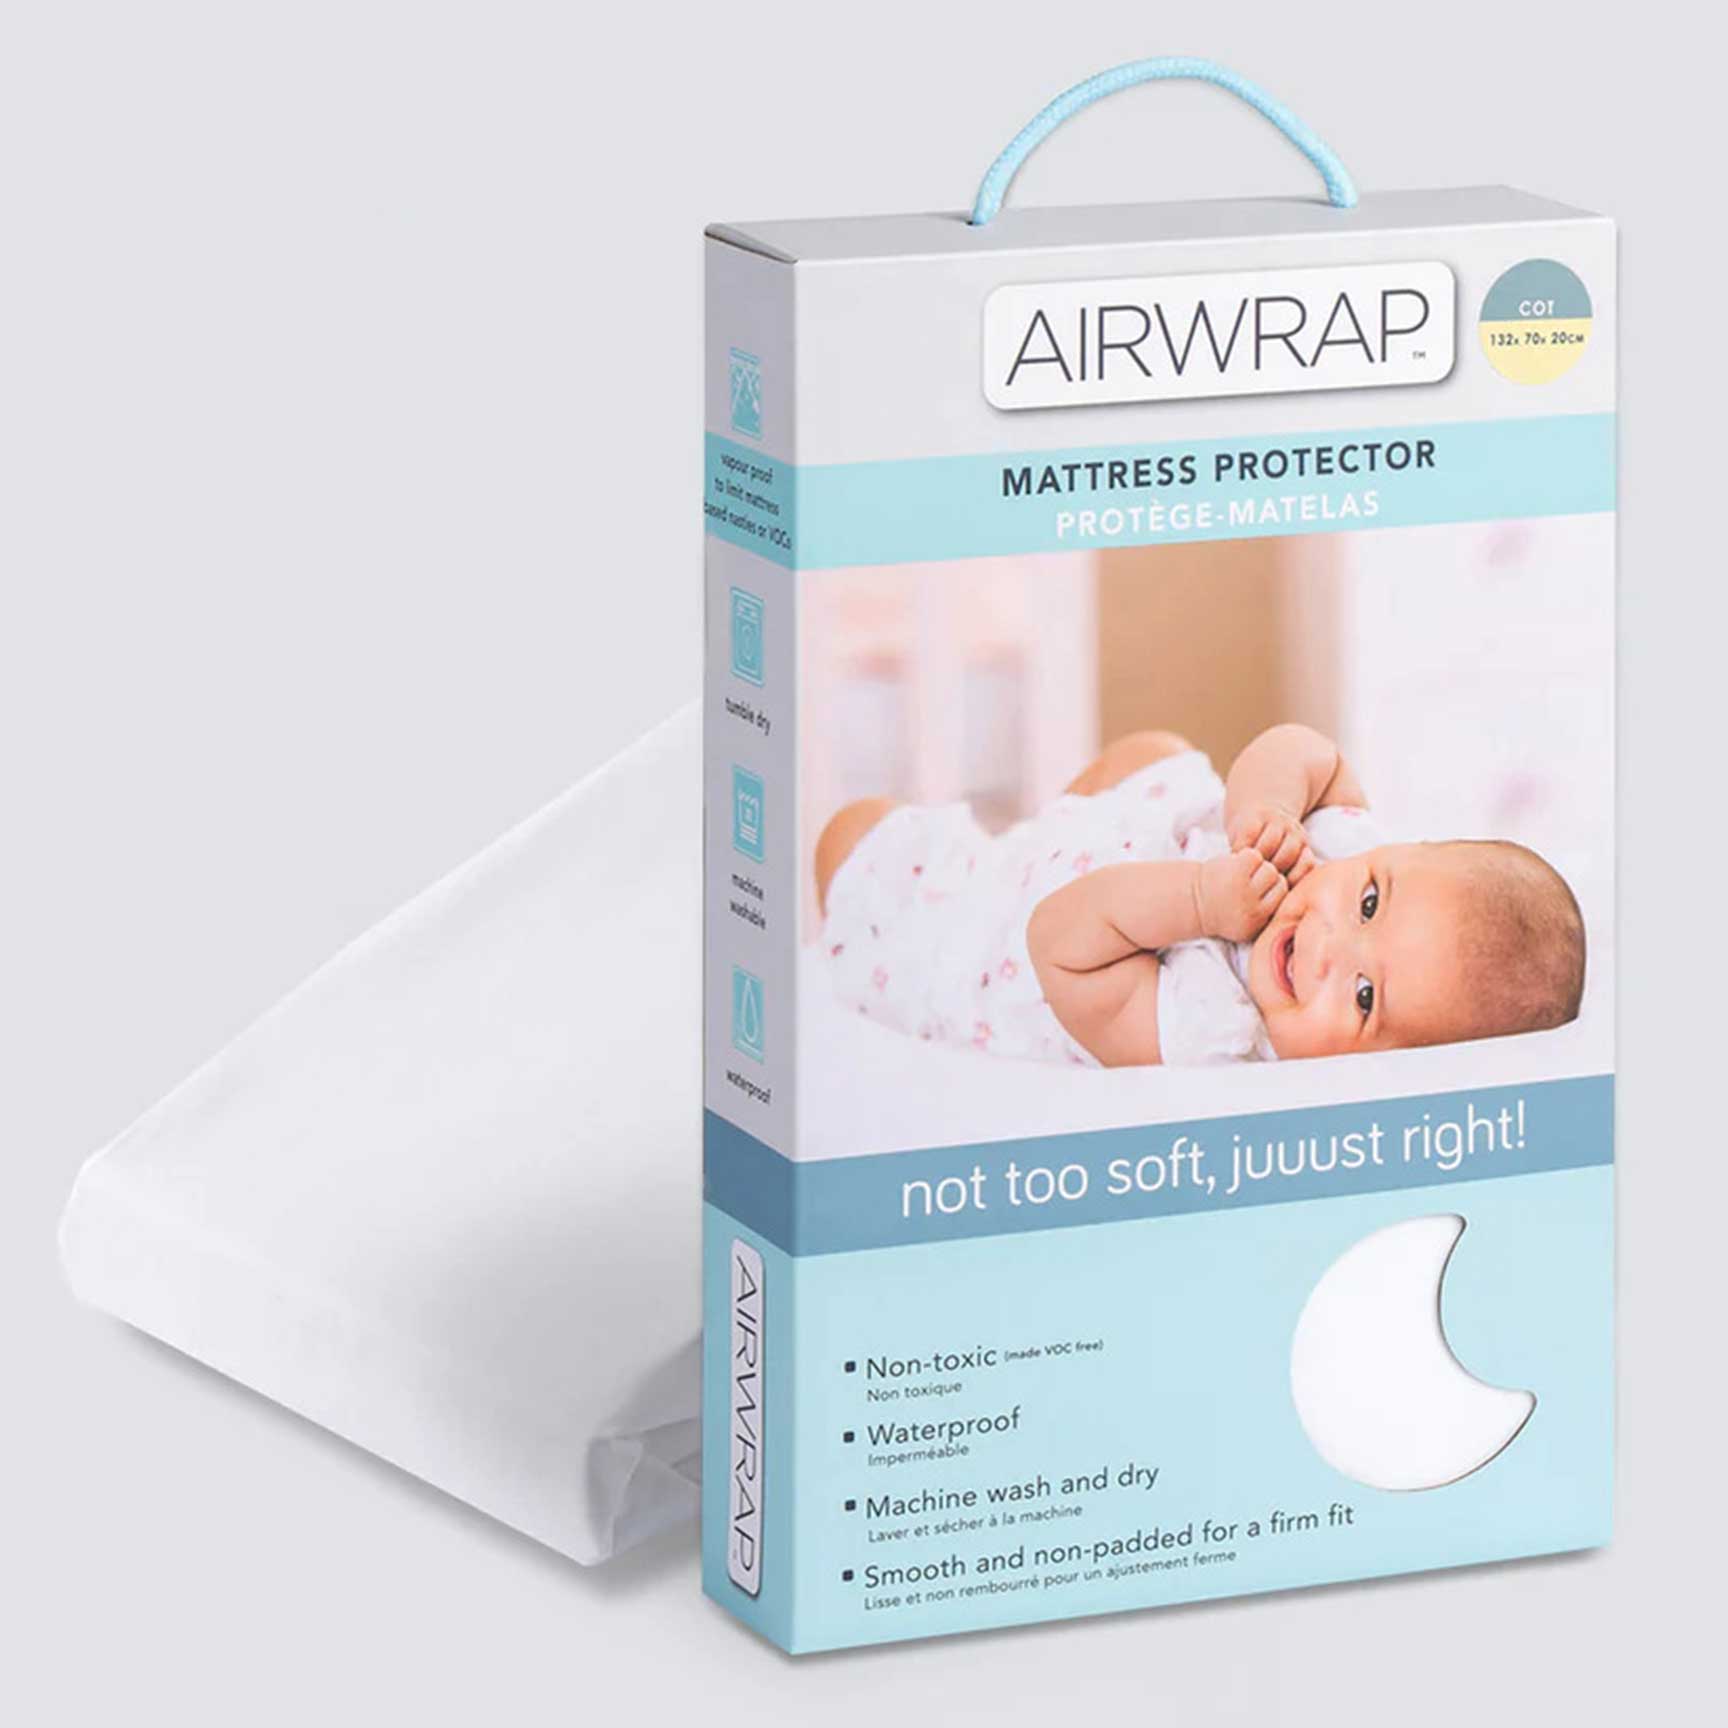 Buy Cot & Cot Bed Sheets From Leading Brands At Baby & Co